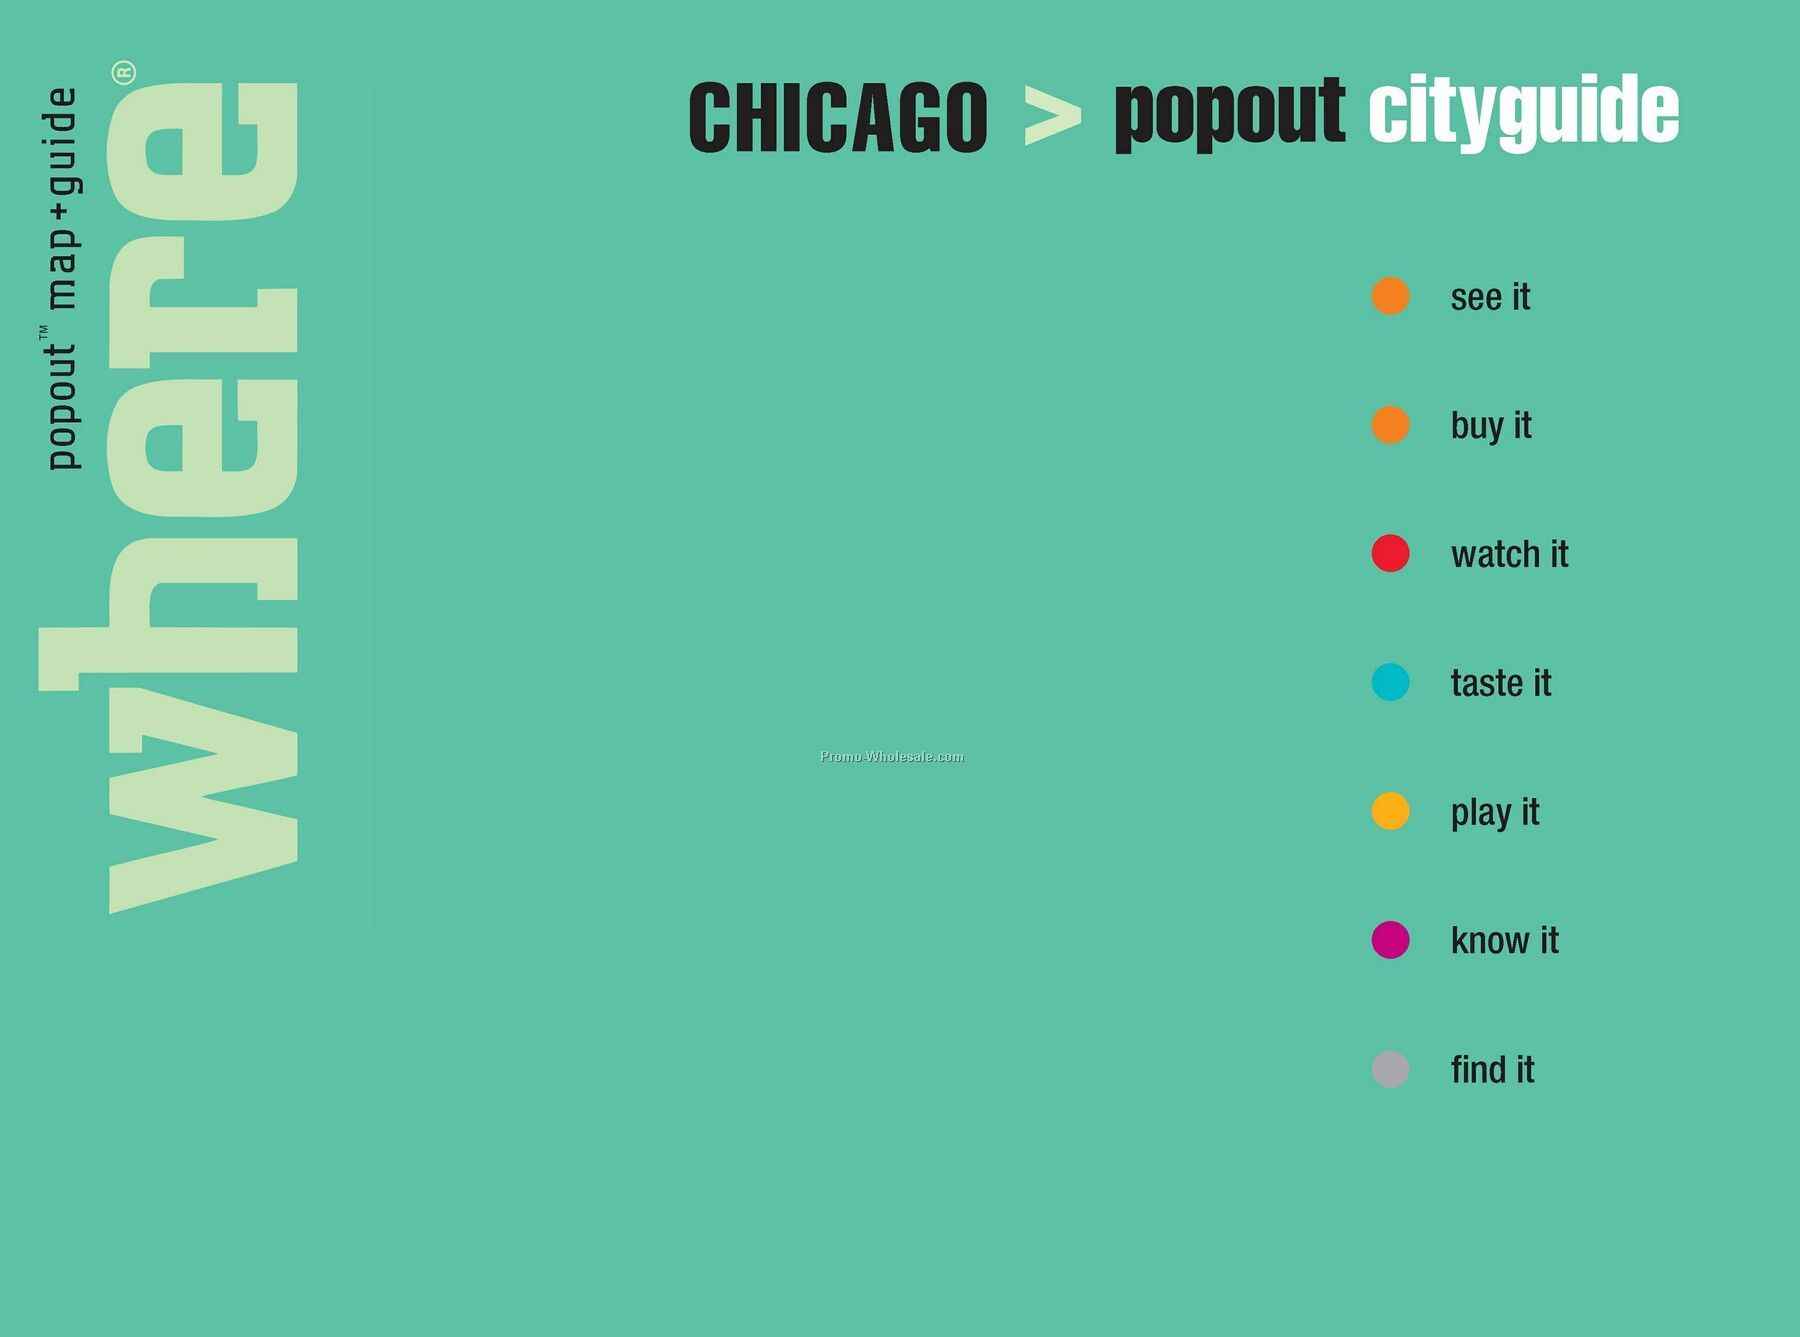 Restaurant Guides - Featuring Popout Maps - City Guide Chicago